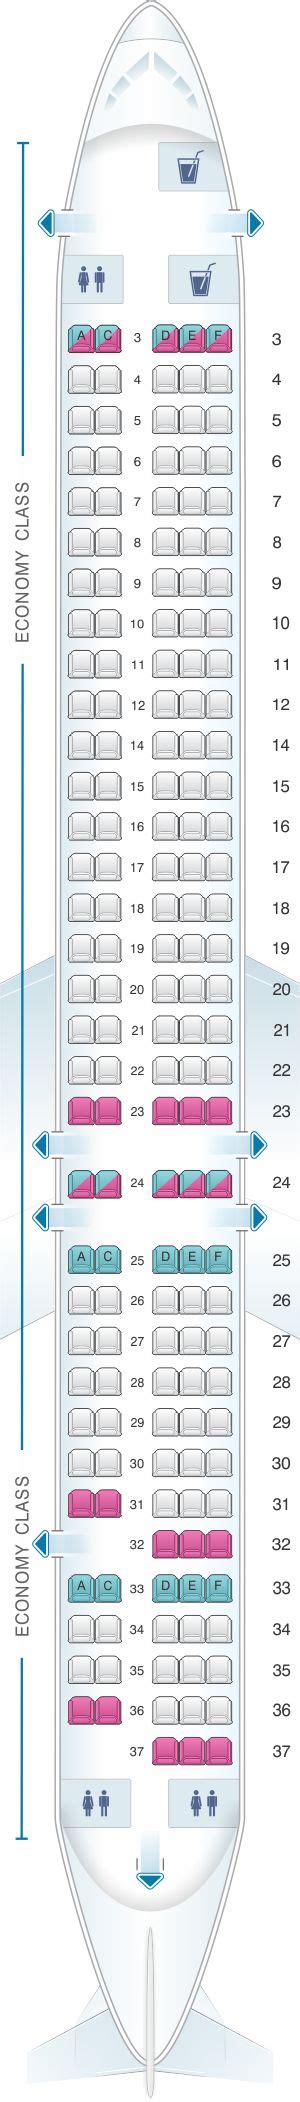 Seating Chart For Allegiant Air